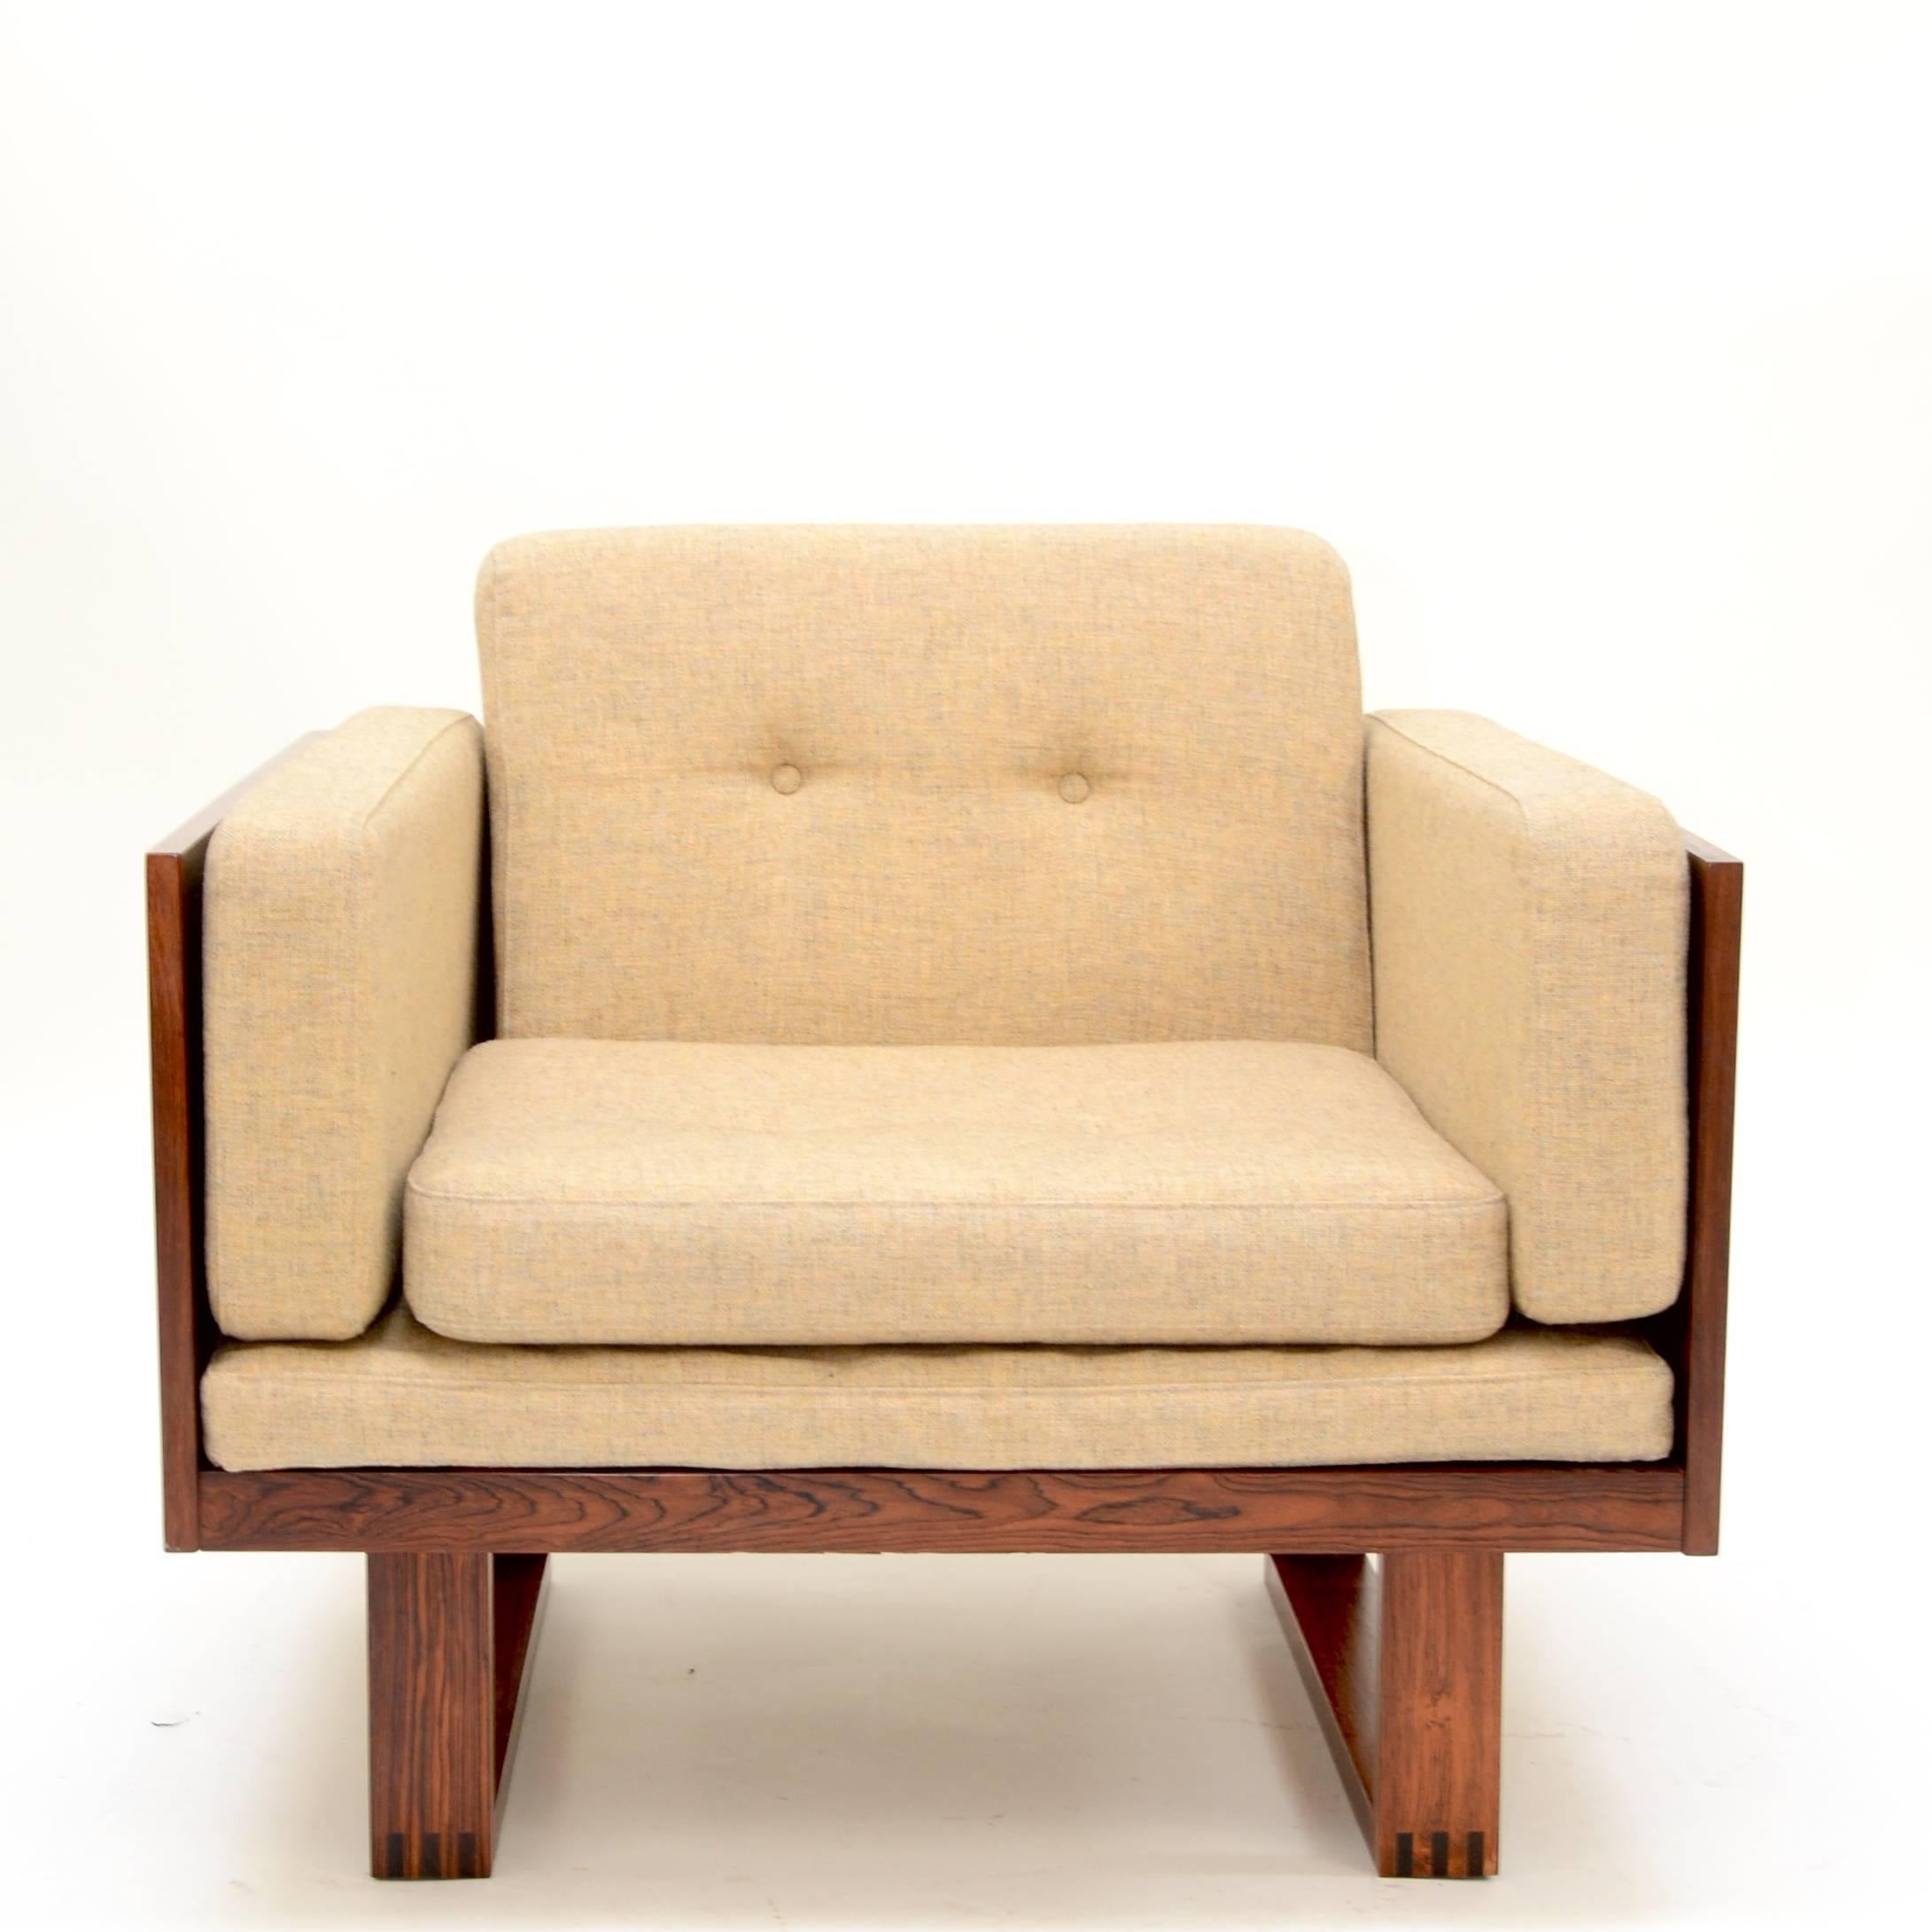 Two-seat sofa and chair set, in Brazilian rosewood by Poul Cadovius for France & Son, Denmark, 1960s. Available separately, please see listings. 

This set is located at our Downtown Los Angeles location. Please inquire for hours.